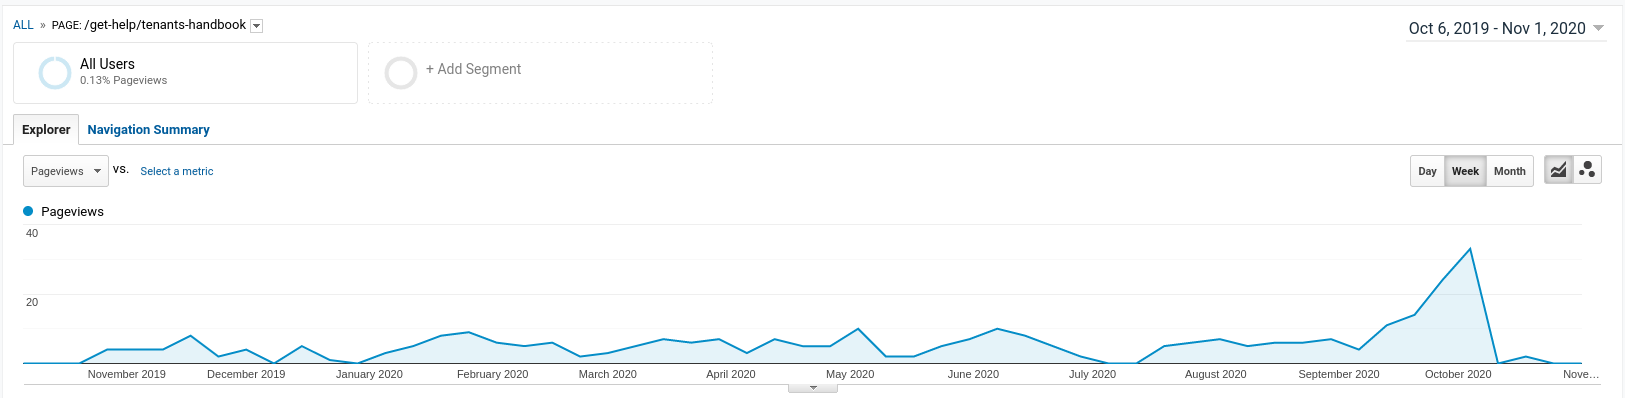 Analytics showing a sharp increase in page. visits to the tenants handbook after changing the resource section design.